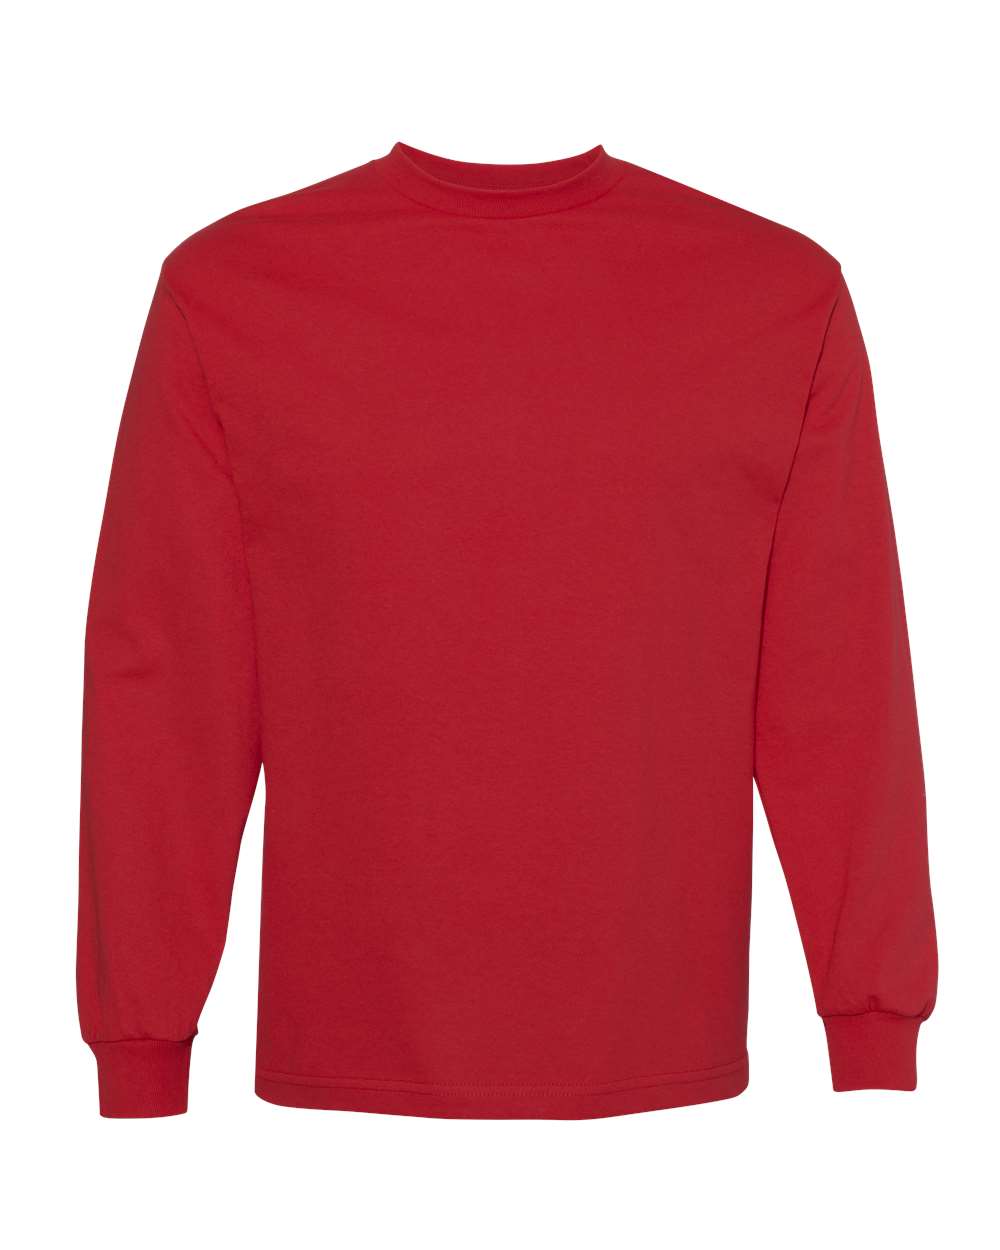 American Apparel Unisex Heavyweight Cotton Long Sleeve Tee 1304 #color_Red